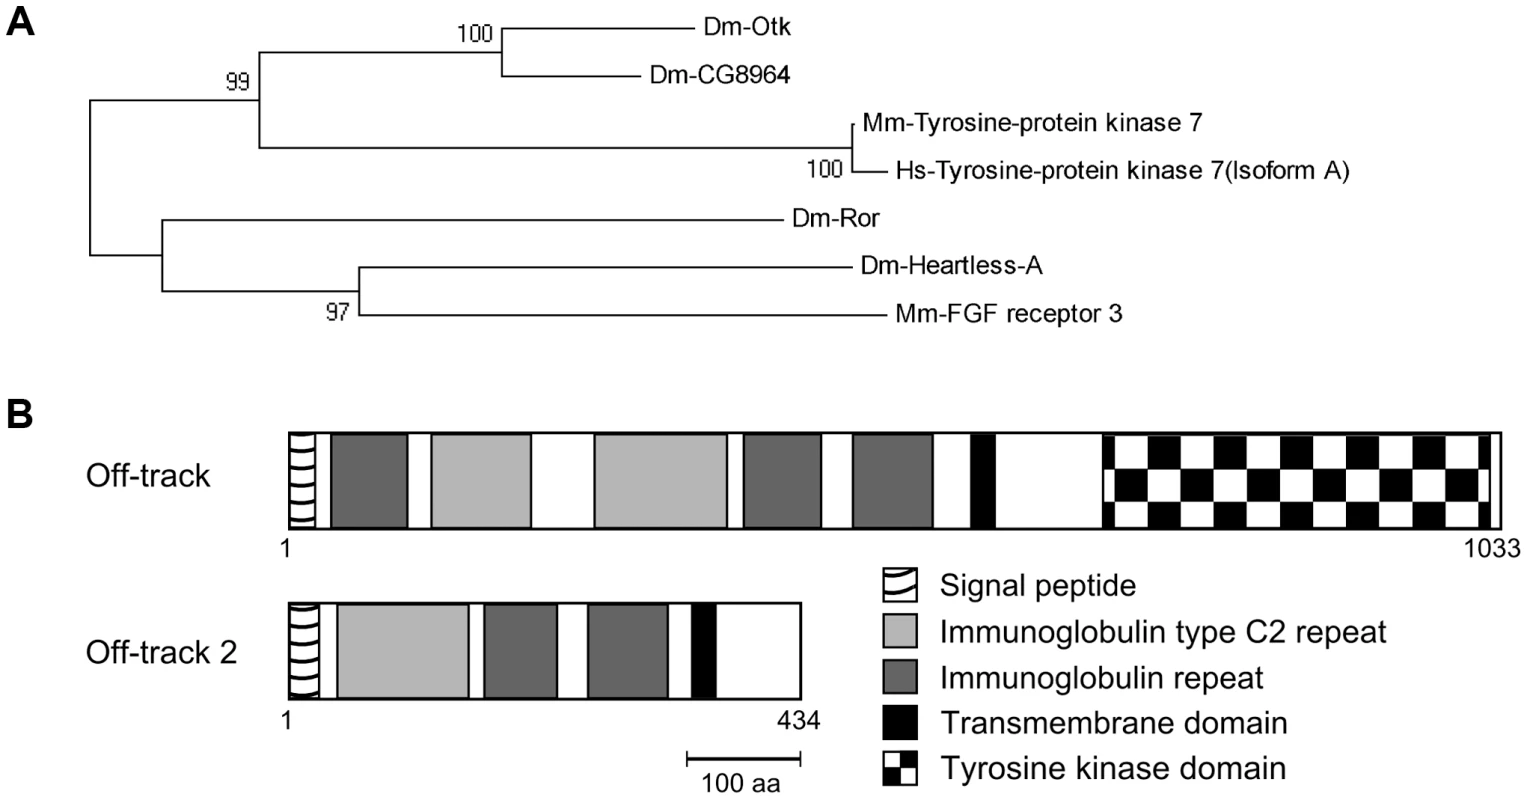 Off-track (Otk) and Off-track2 (CG8964, Otk2) are paralogs evolved by gene duplication.